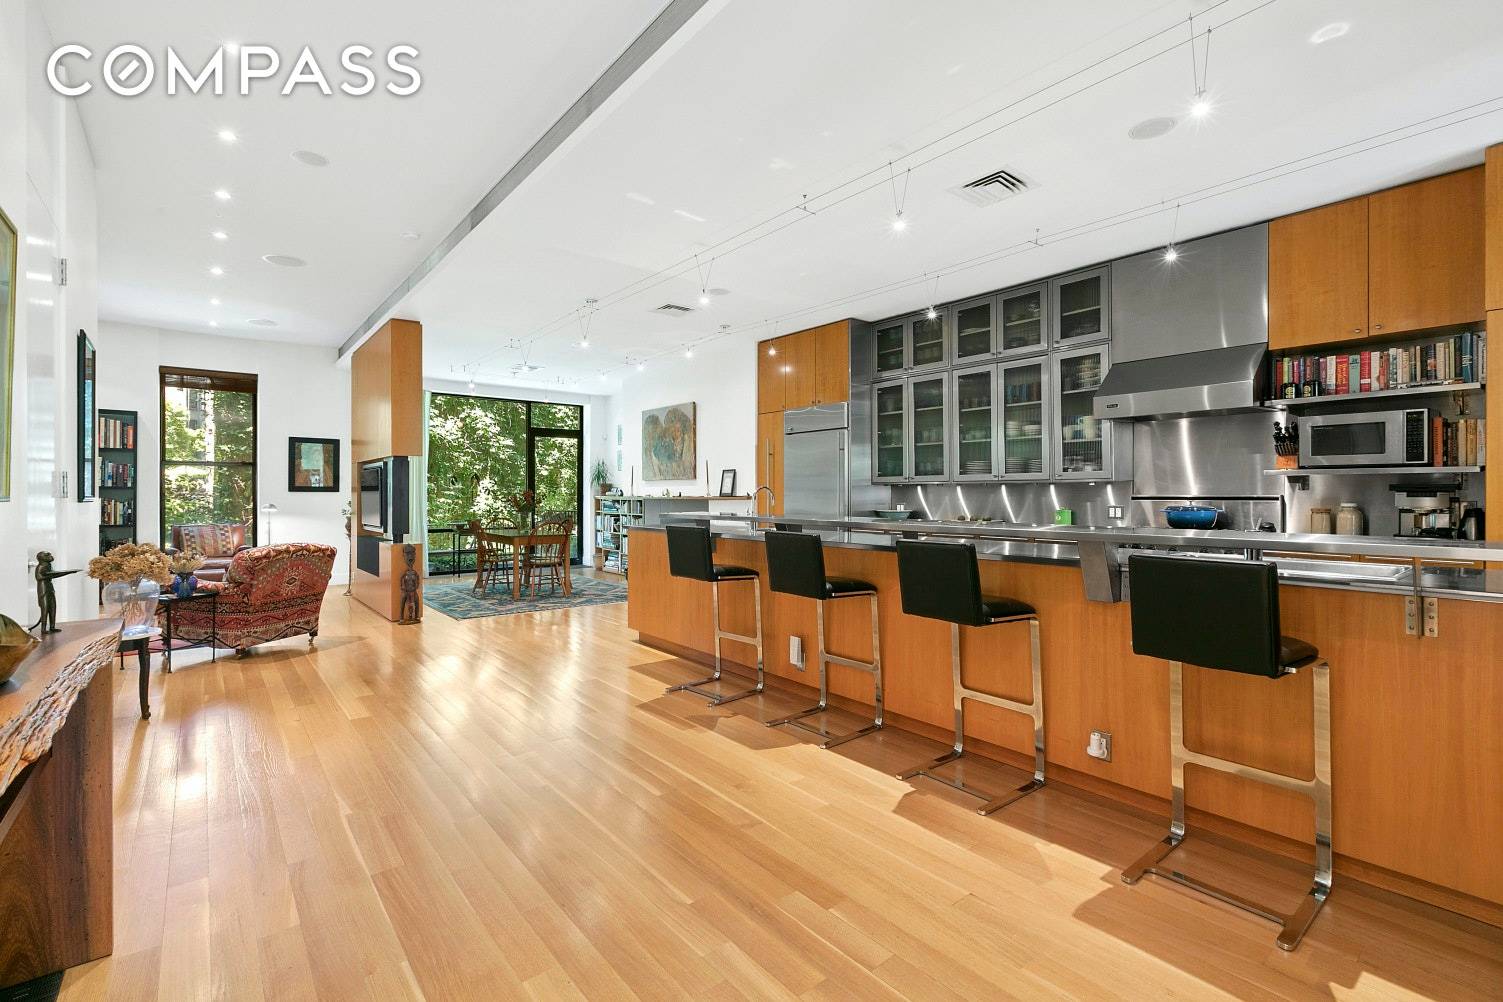 City Oasis When searching for the most perfect home, light, space and a serene backyard are inspirational essentials.